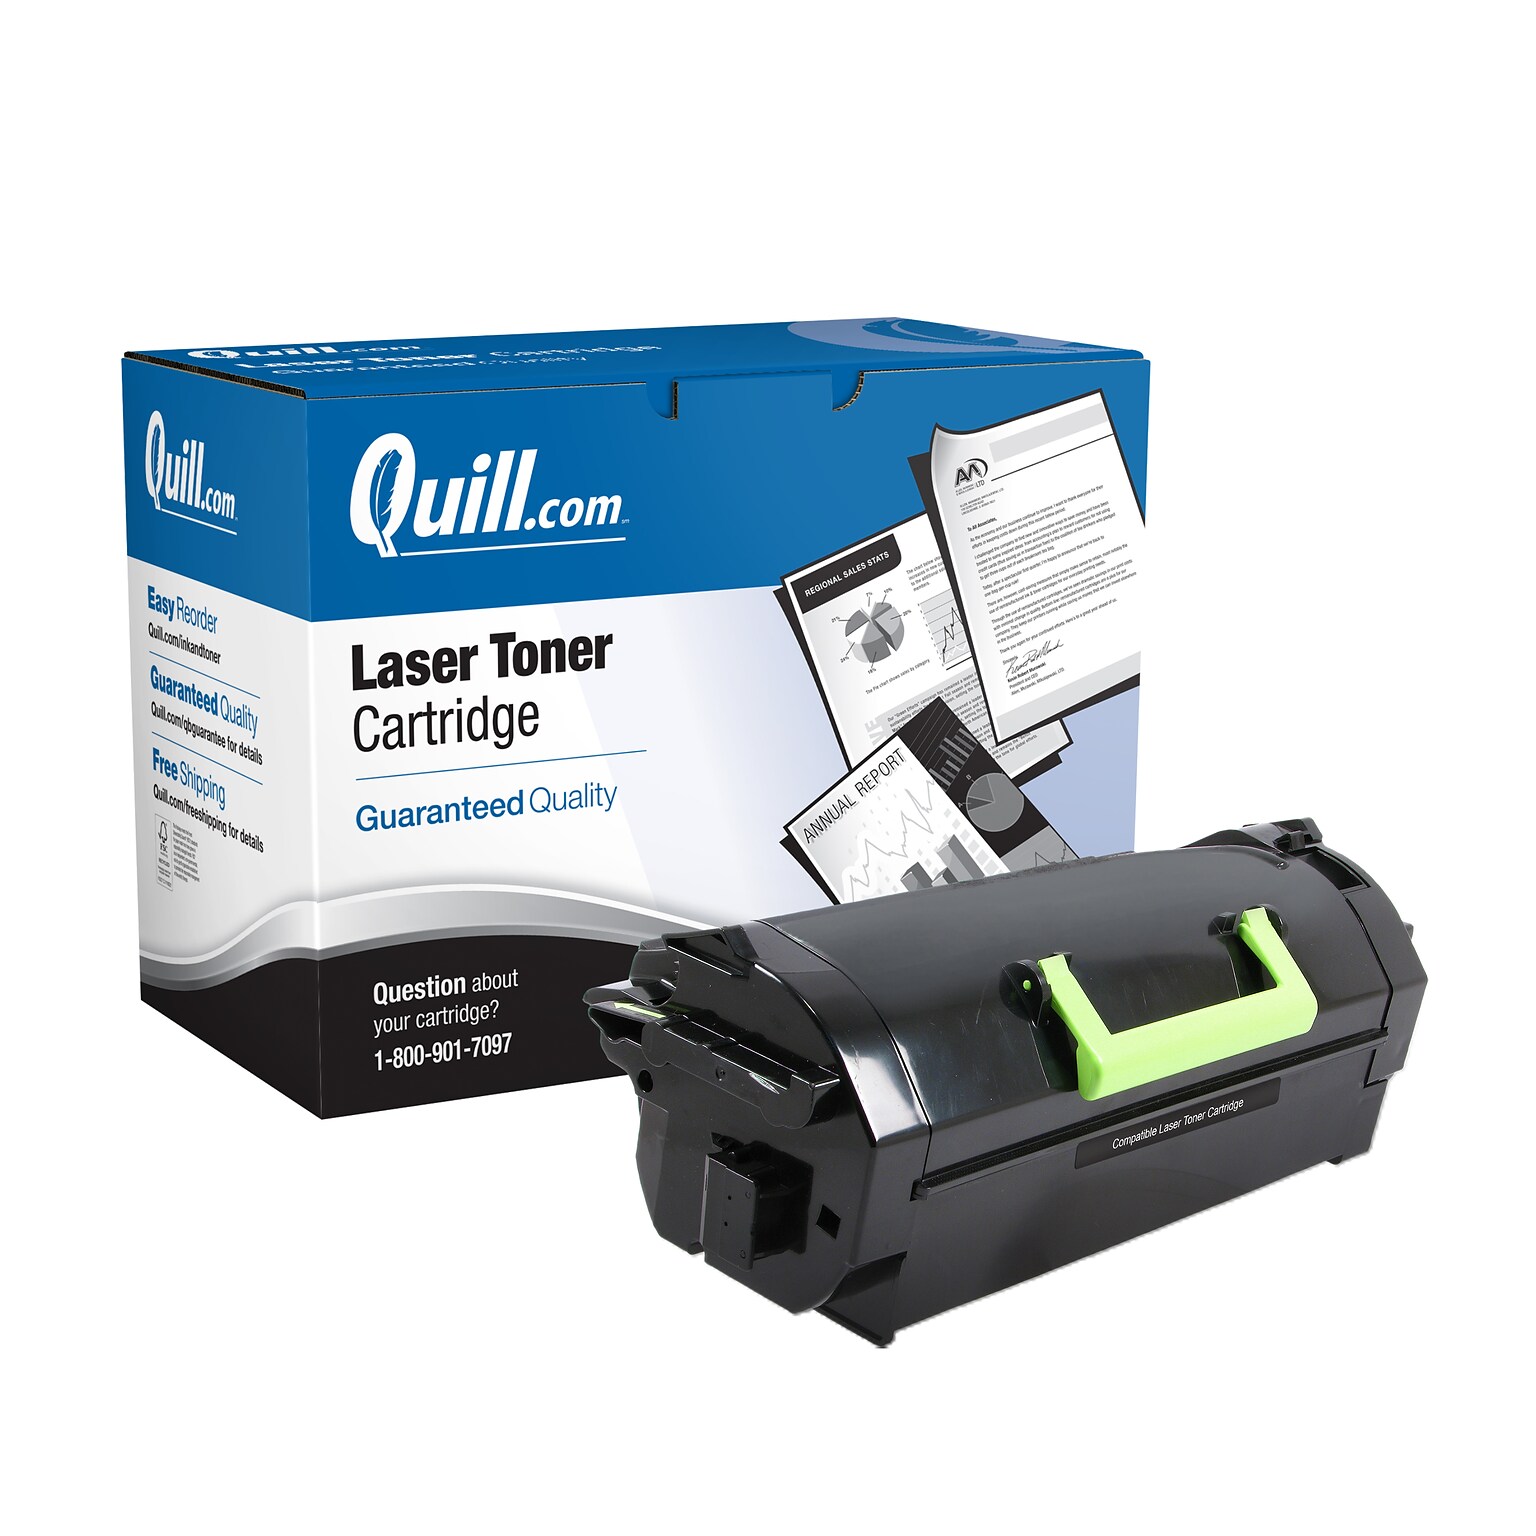 Quill Brand® Remanufactured Black High Yield Toner Cartridge Replacement for Lexmark MS710 (52D0HA0) (Lifetime Warranty)